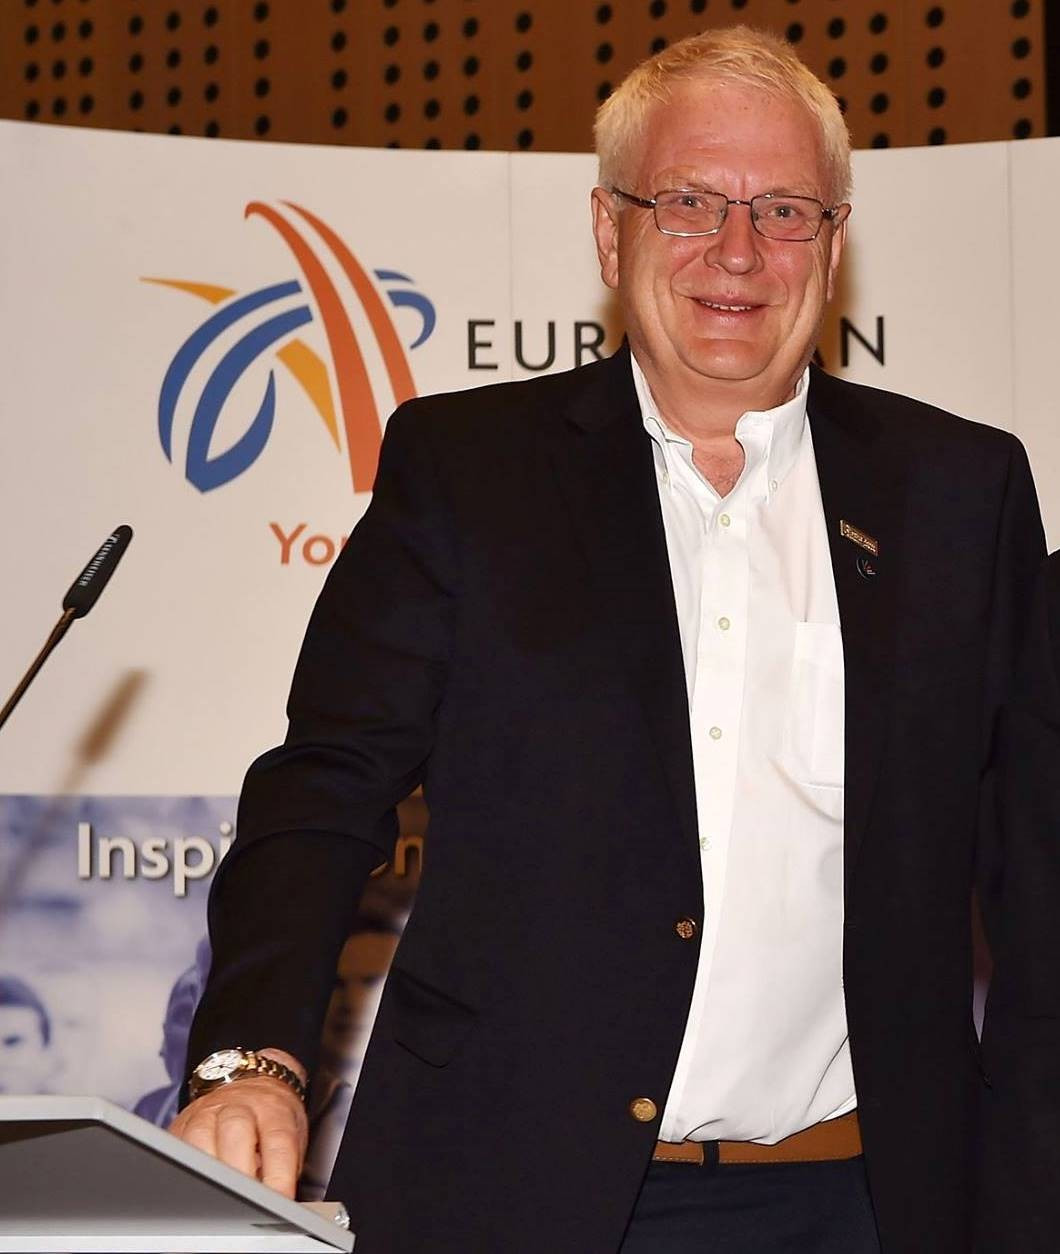 Exclusive: Newly elected European Athletics President Hansen hints at new event for European Games